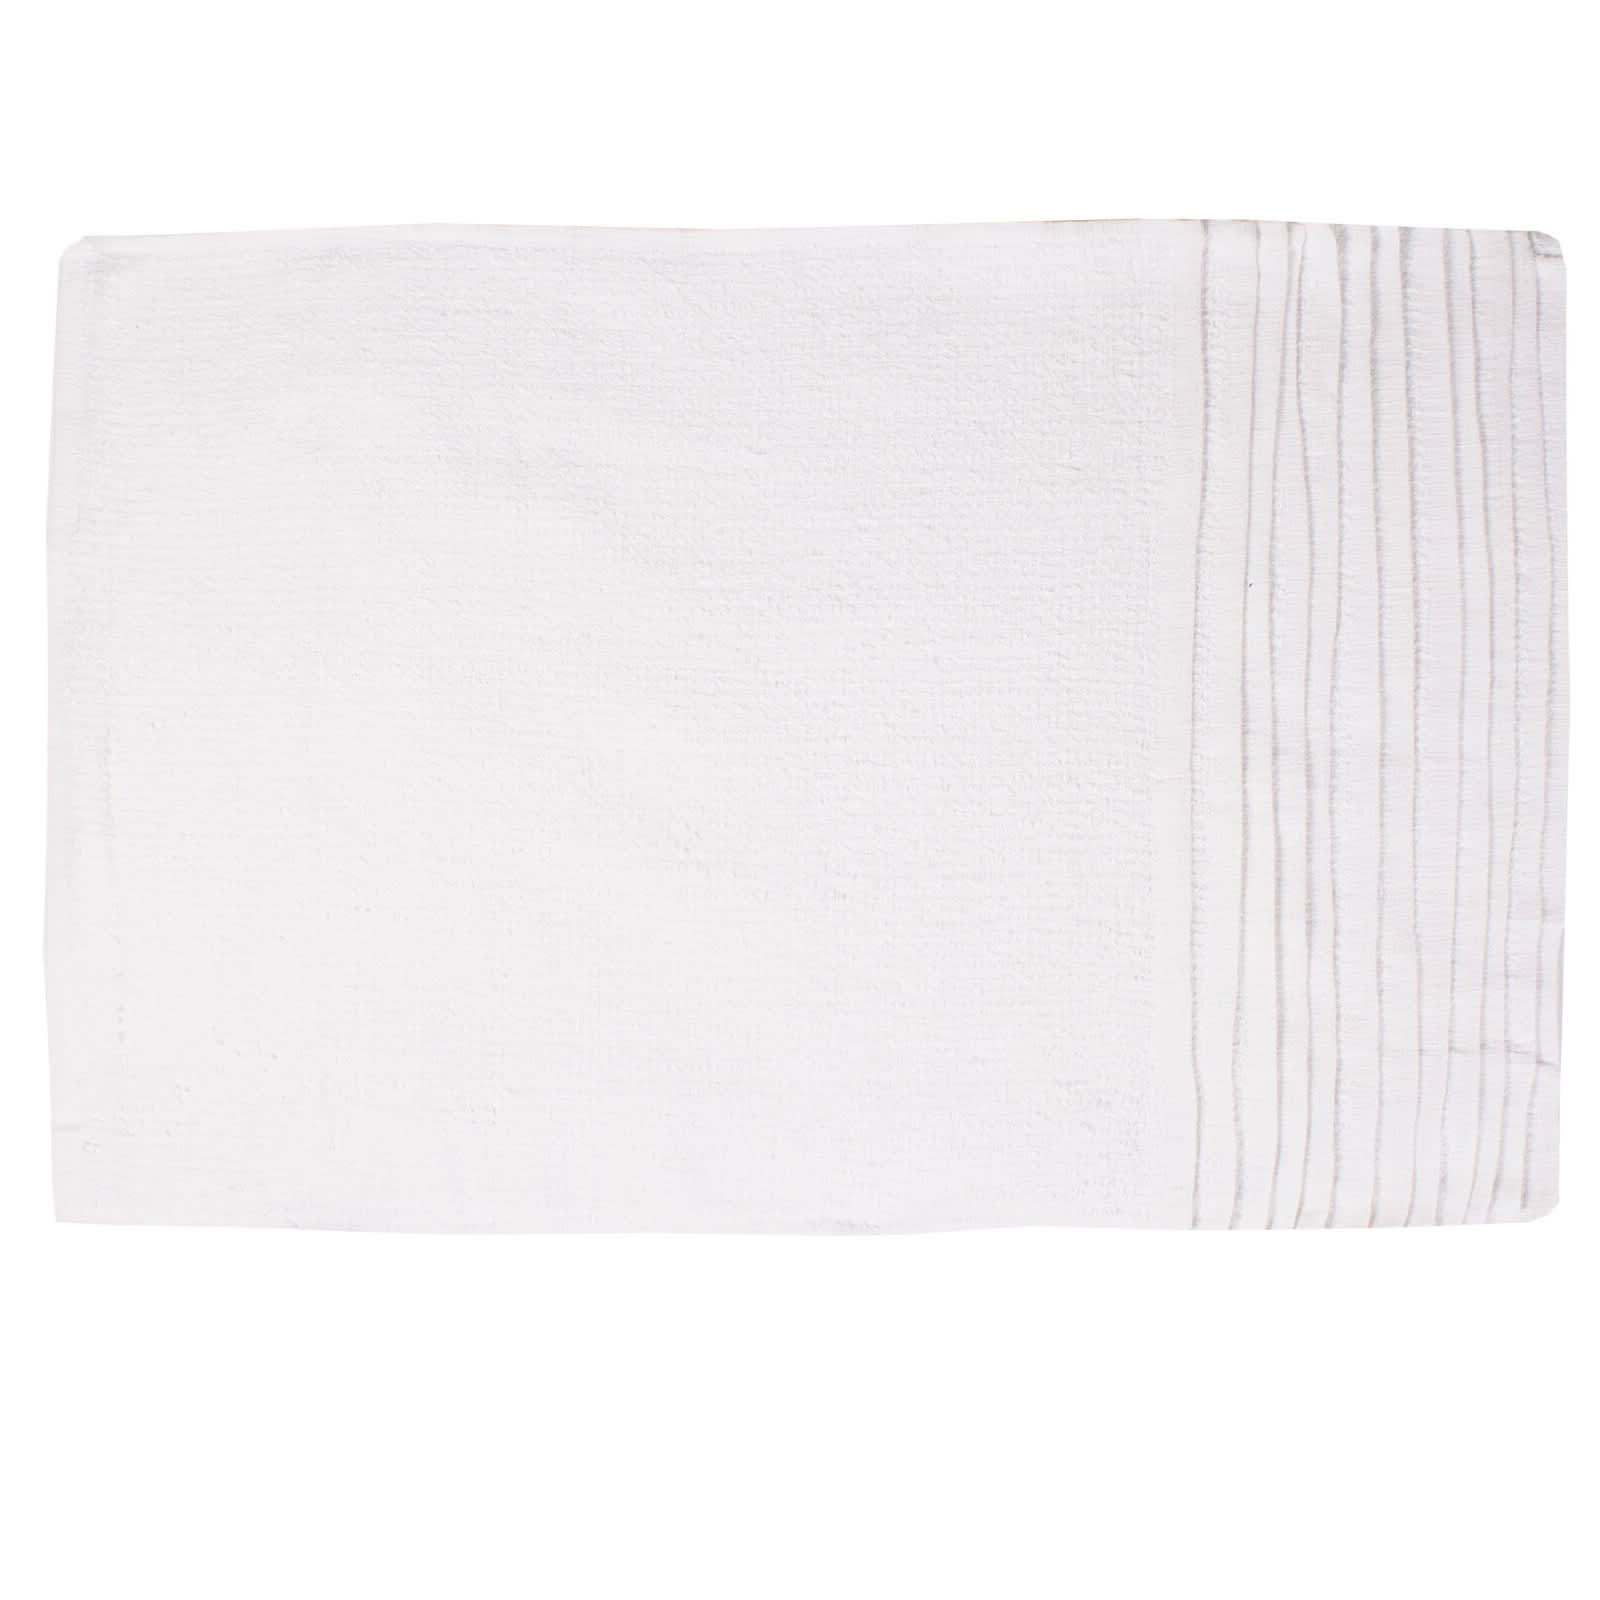 16x19- Bar Towels All White 100% Cotton